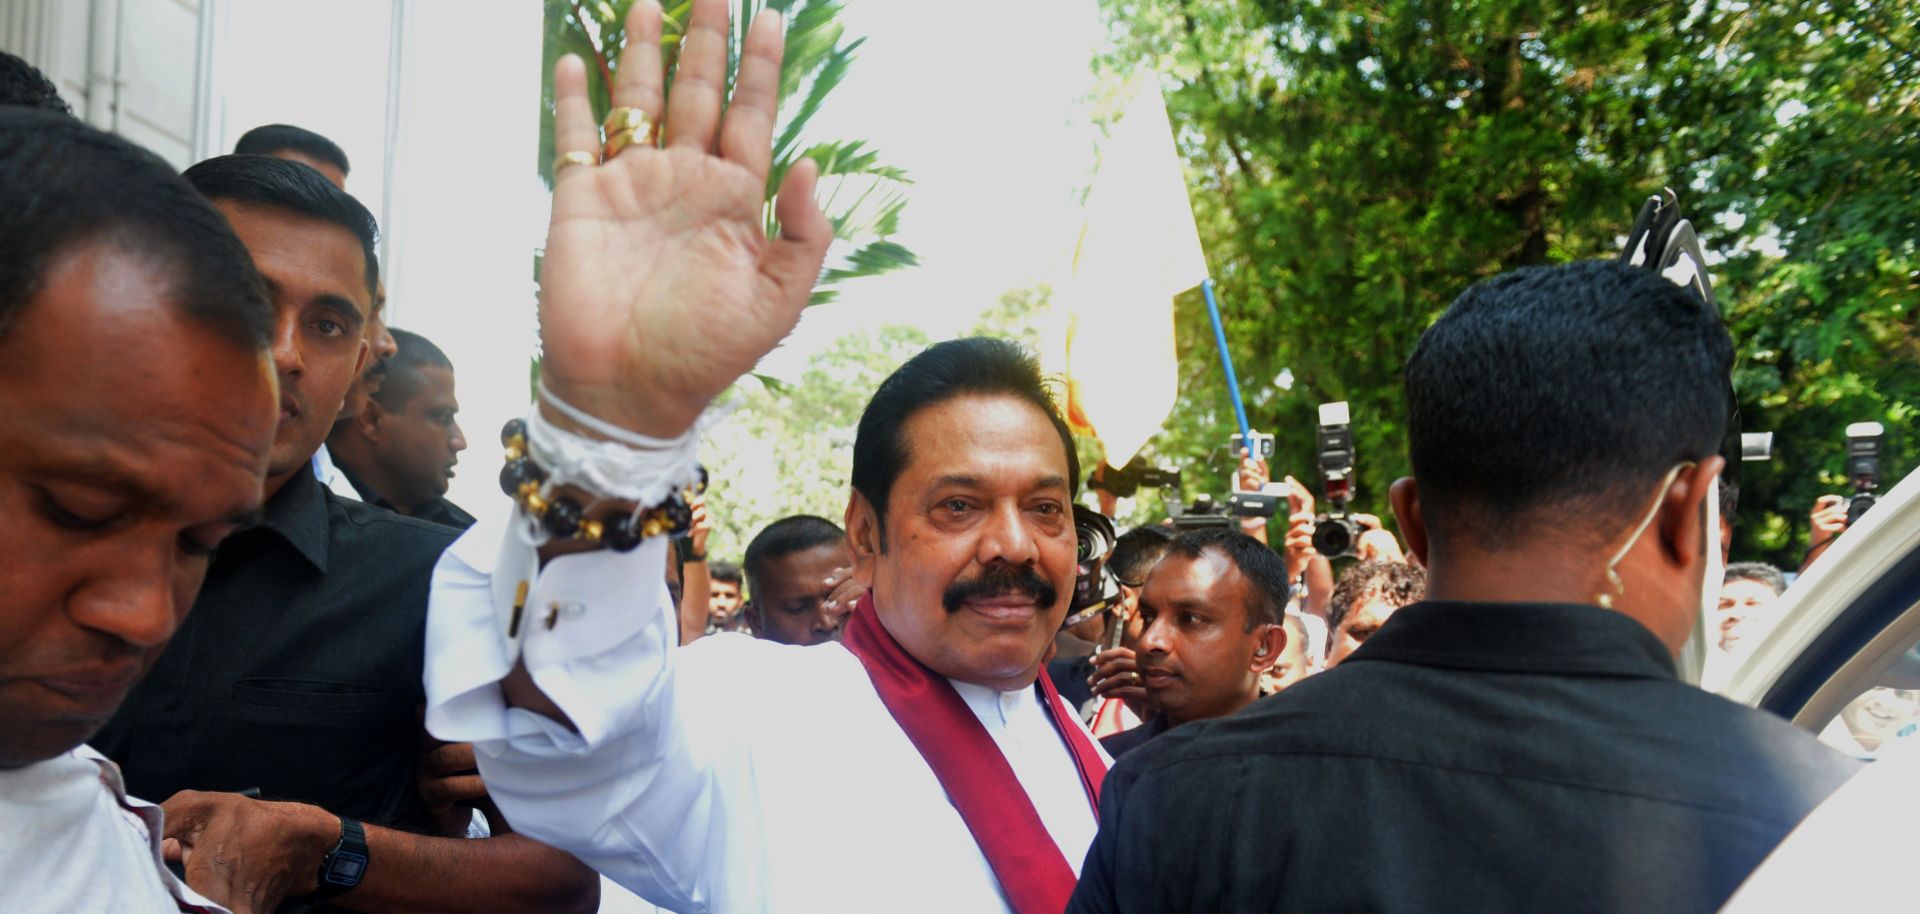 Sri Lanka's newly appointed prime minister, Mahinda Rajapaksa, waves to supporters after a ceremony to assume duties in Colombo on Oct. 